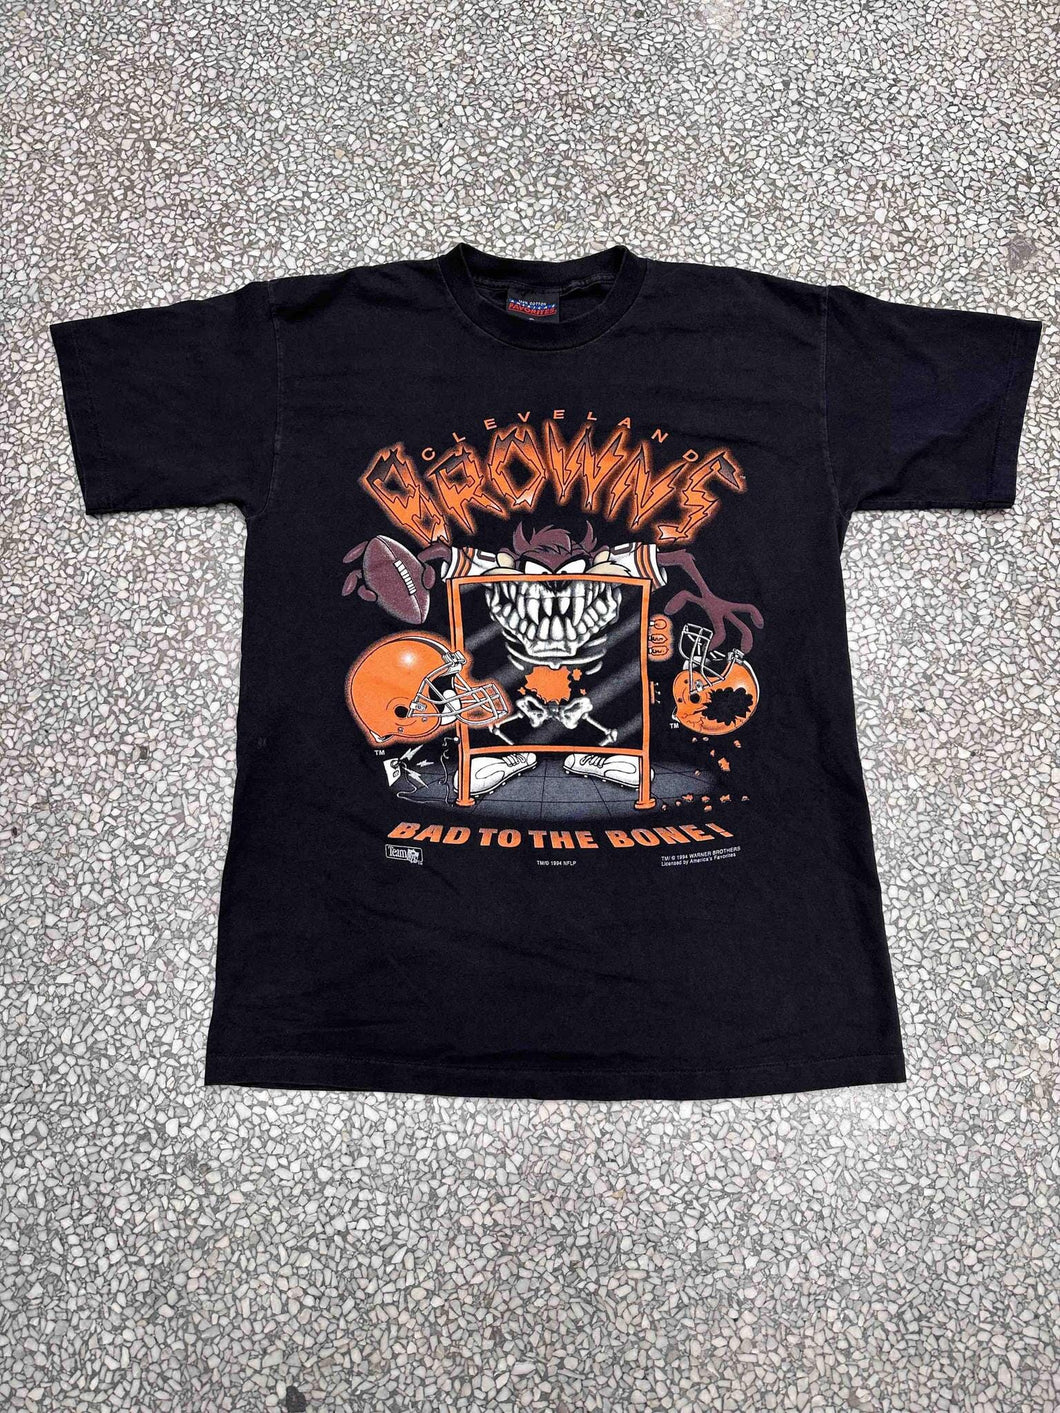 Cleveland Browns Vintage 1994 Taz Bad To The Bone Faded Black ABC Vintage 